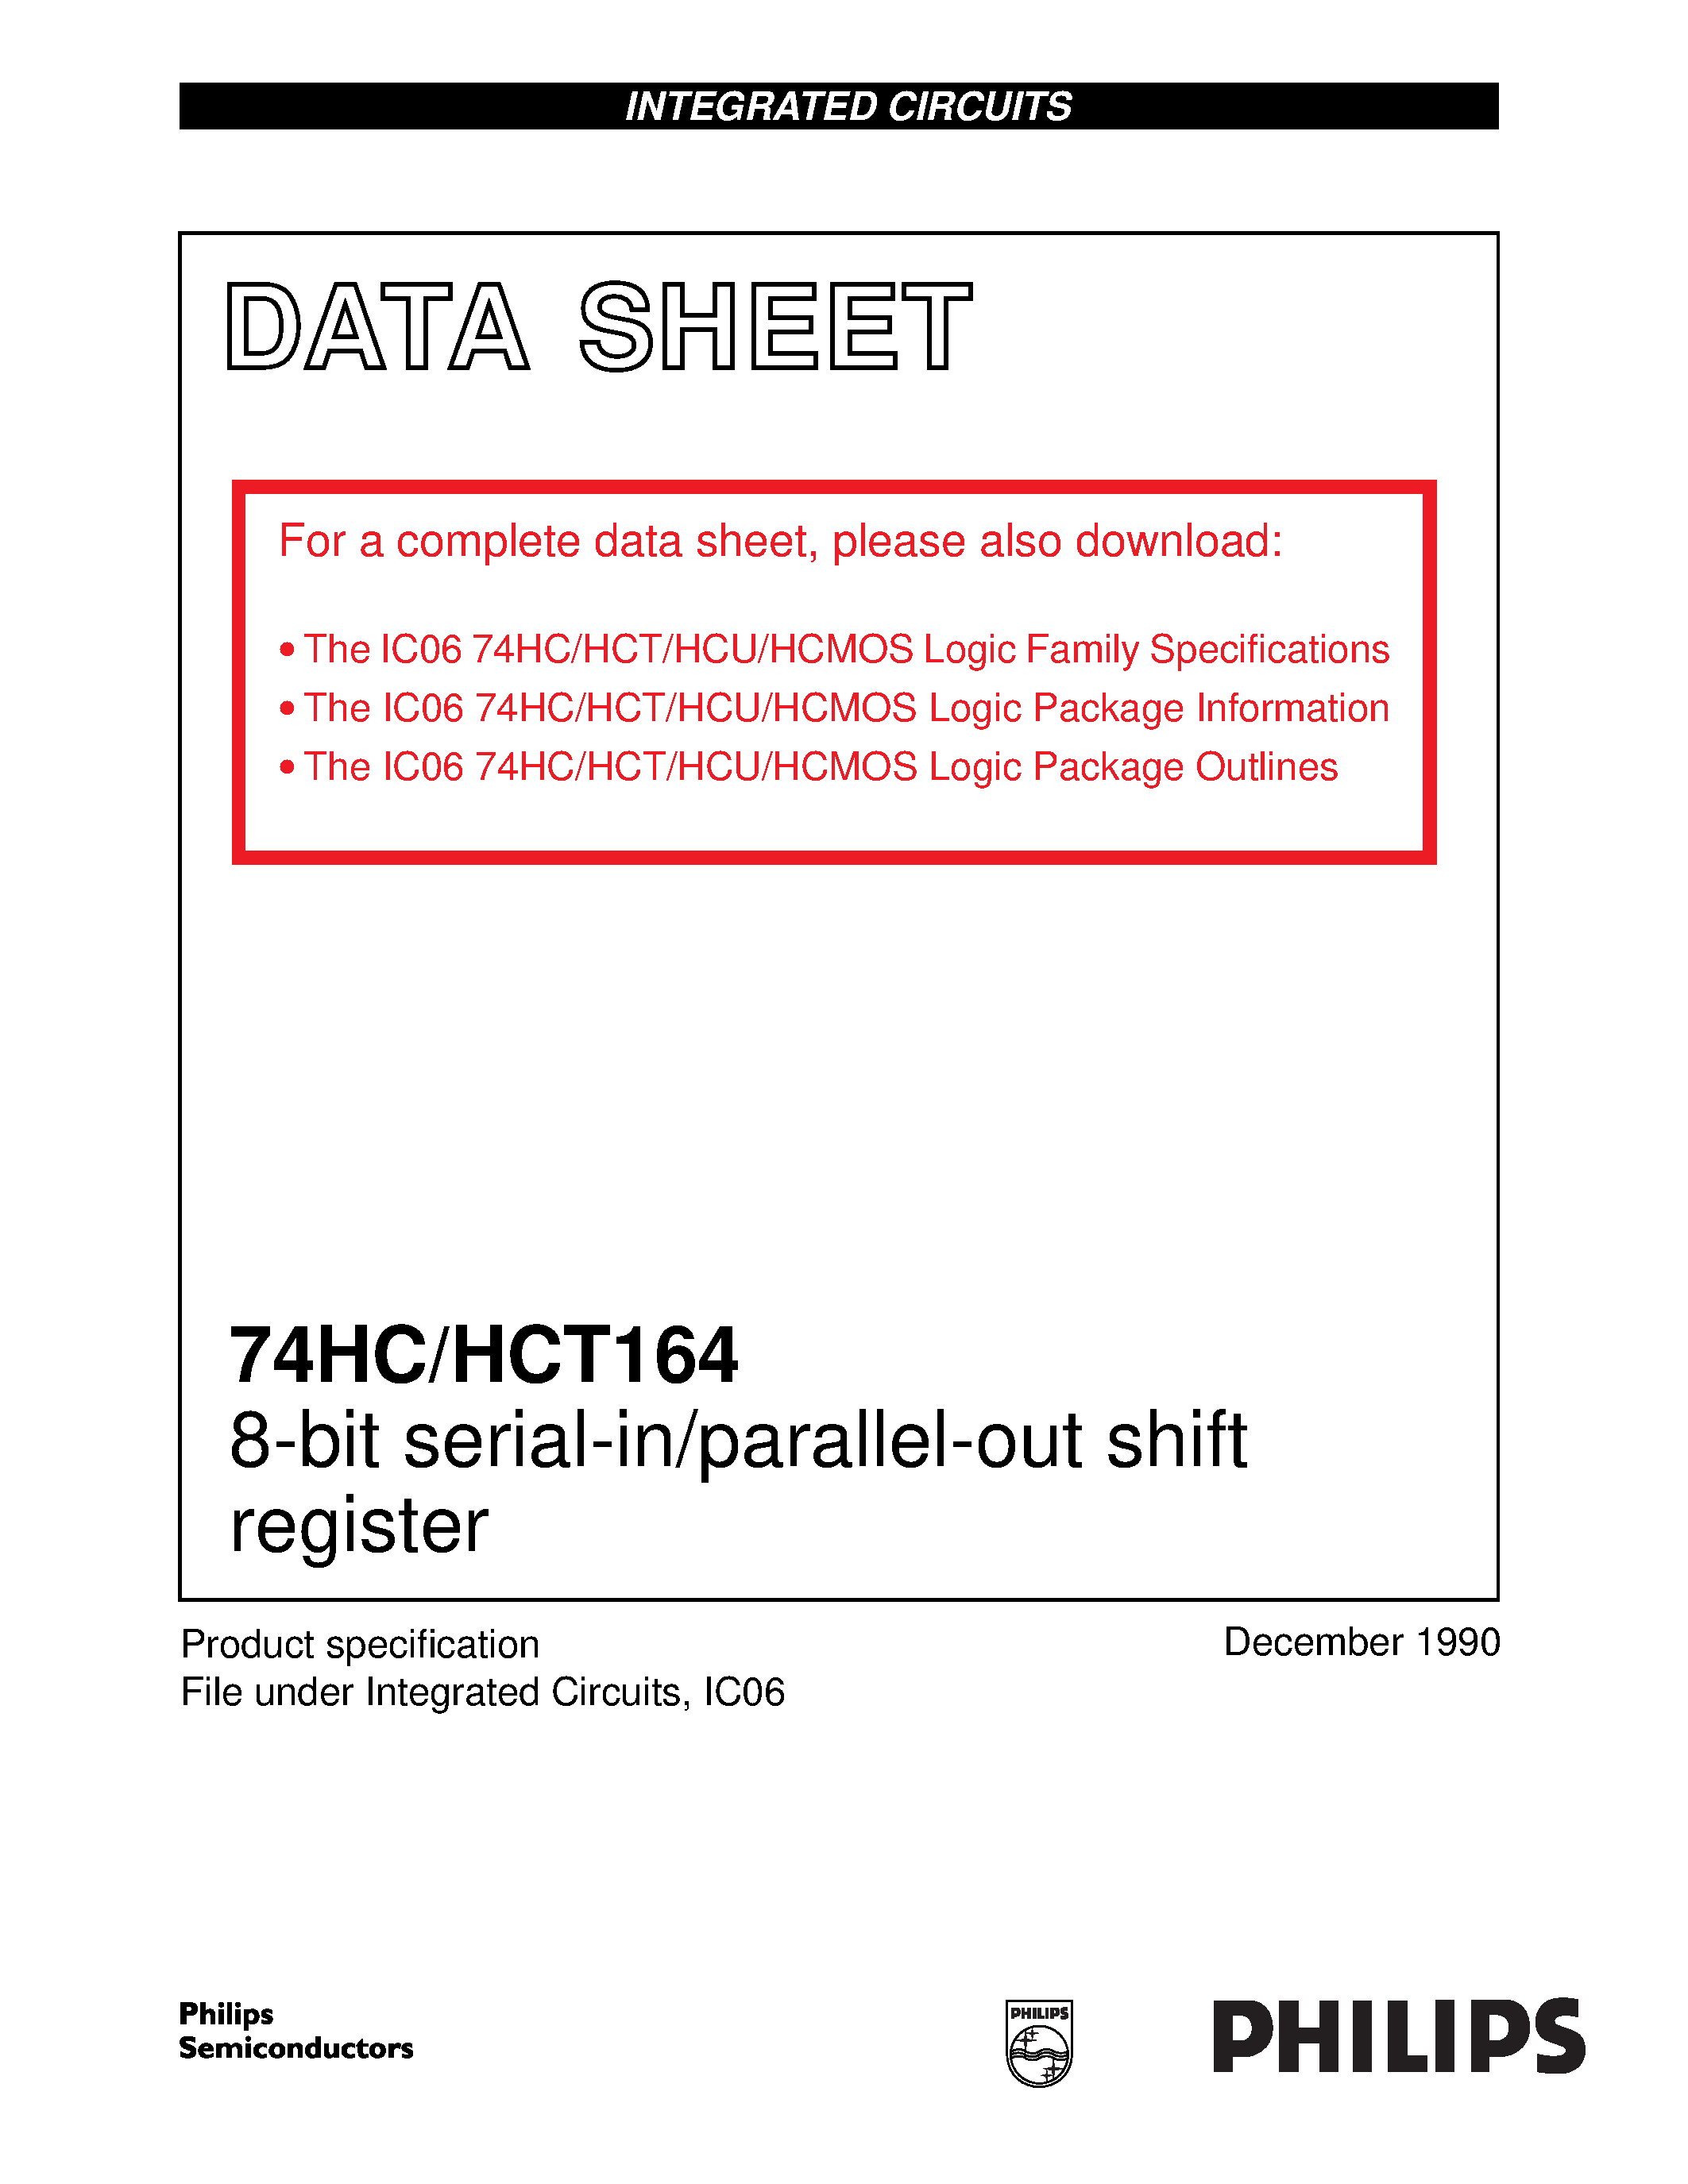 Datasheet 74HCT164 - 8-bit serial-in/parallel-out shift register page 1